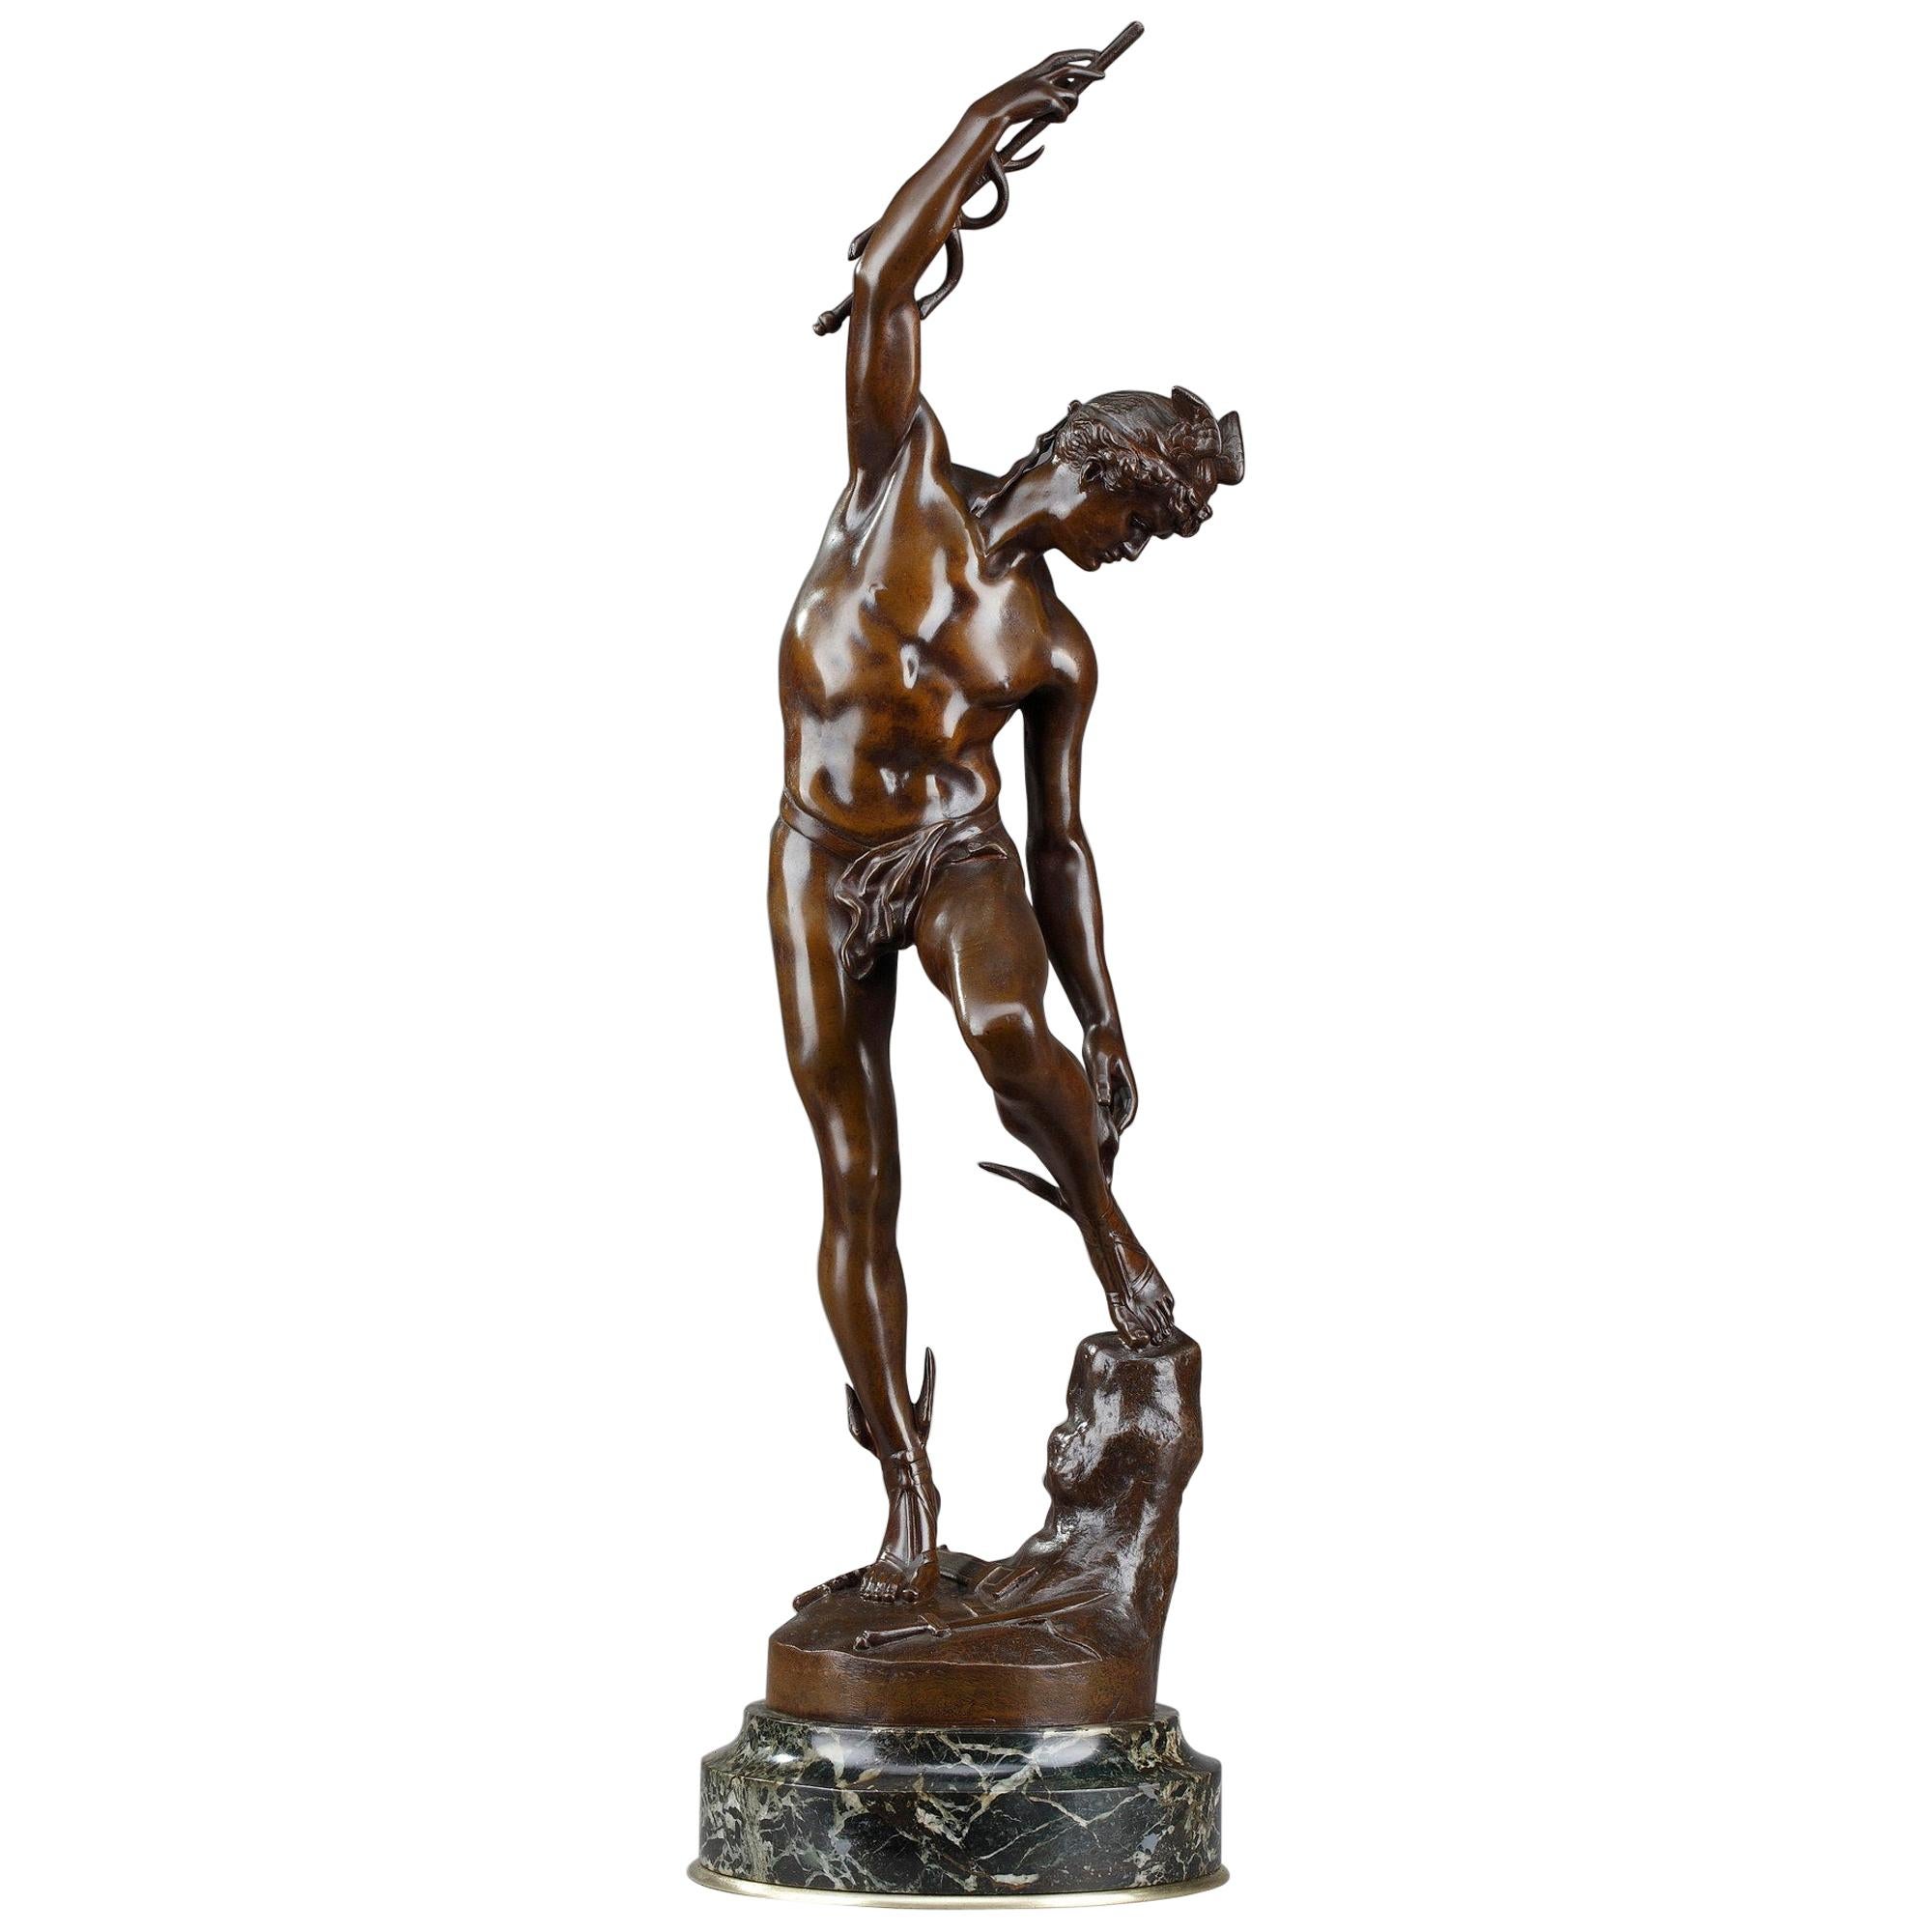 Early 20th Century Bronze Hermes Adjusting his Sandal after the Antique